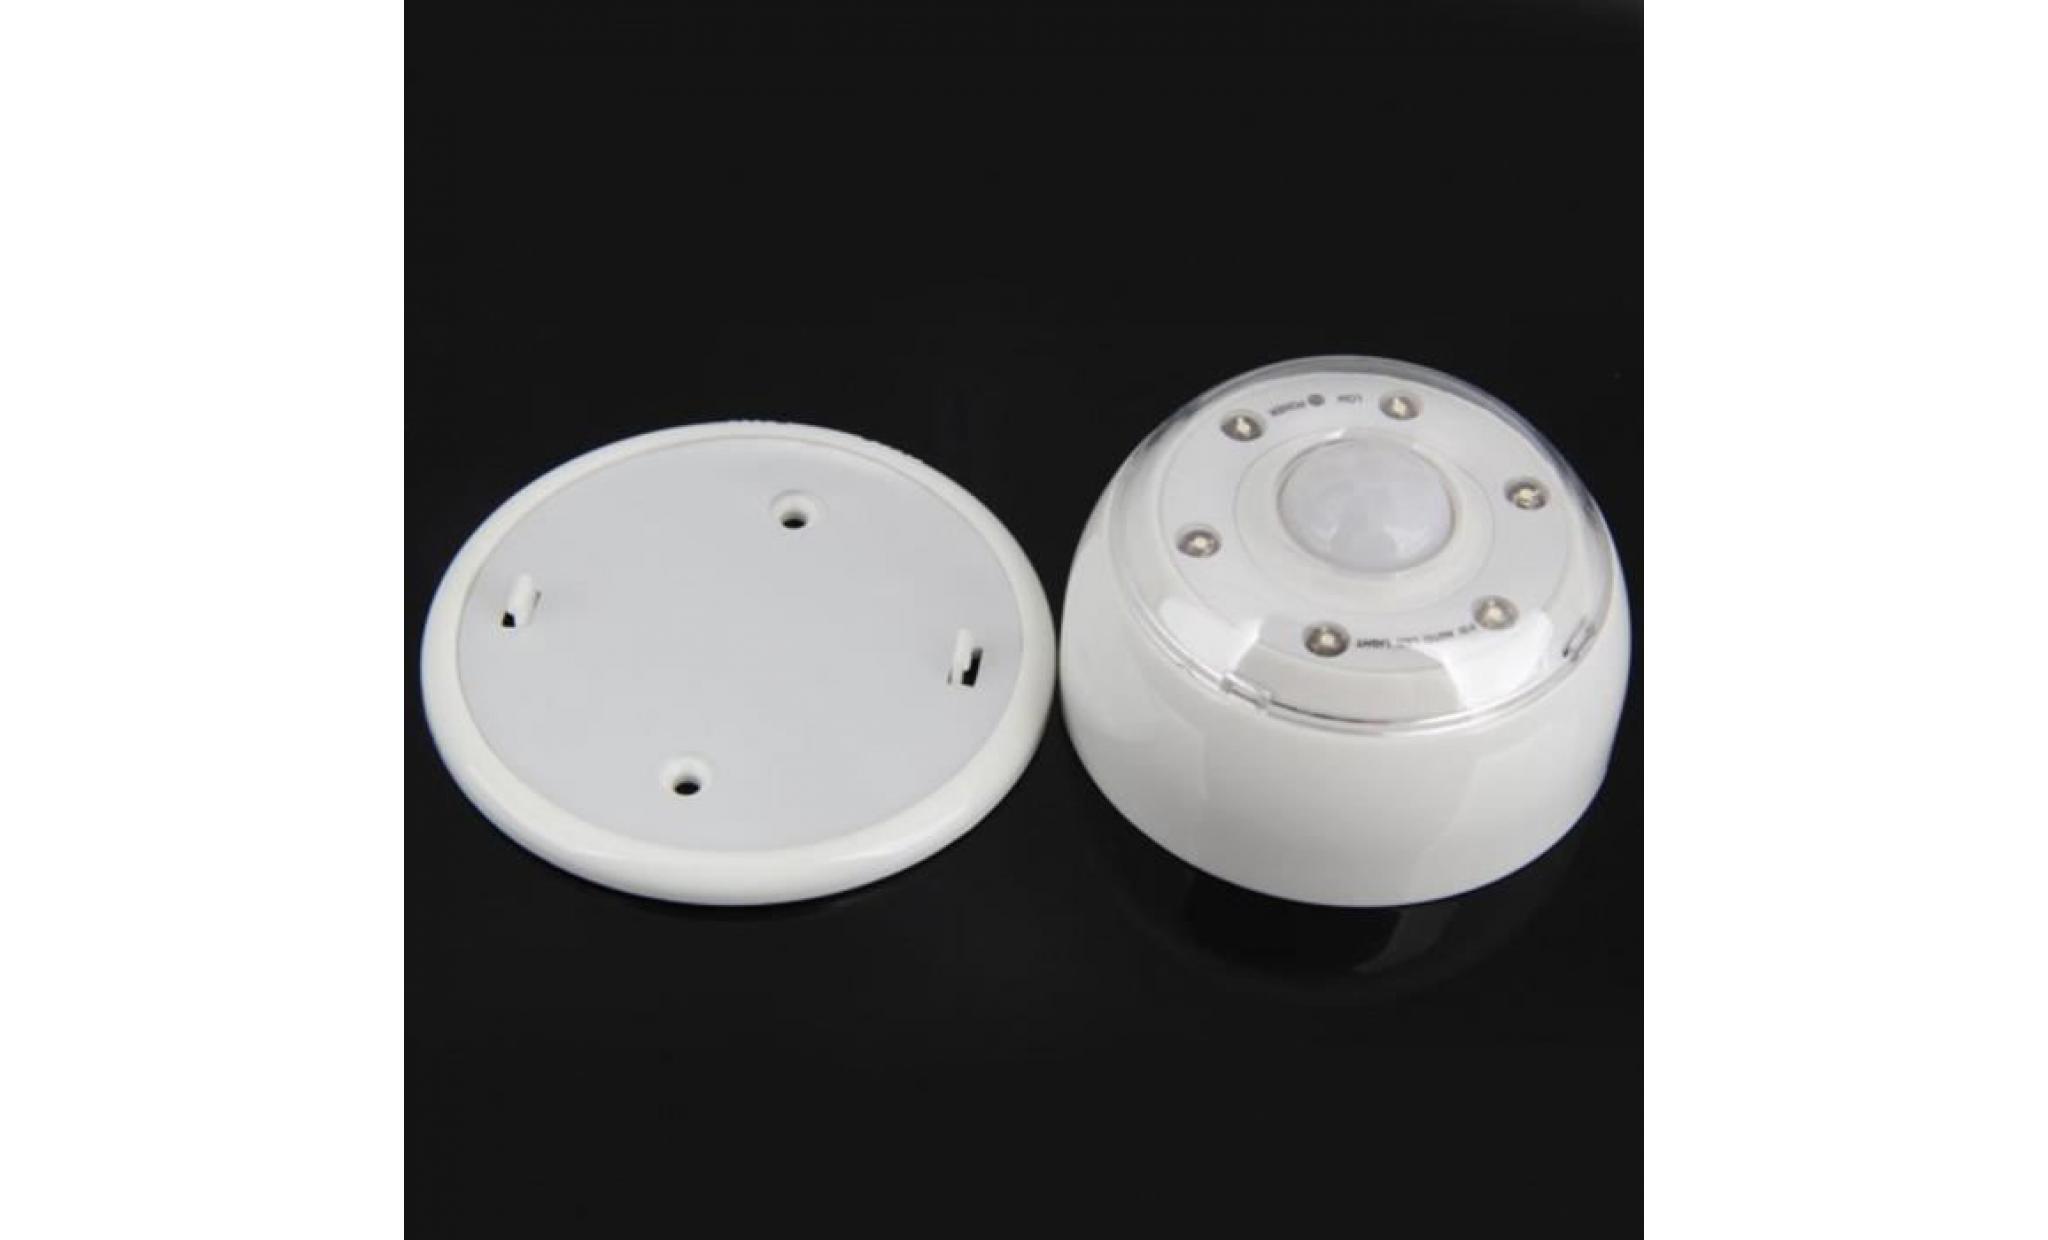 pir auto sensor motion detector lamp 6 leds light wireless infrared home outdoor pageare1052 pageare1052 pas cher